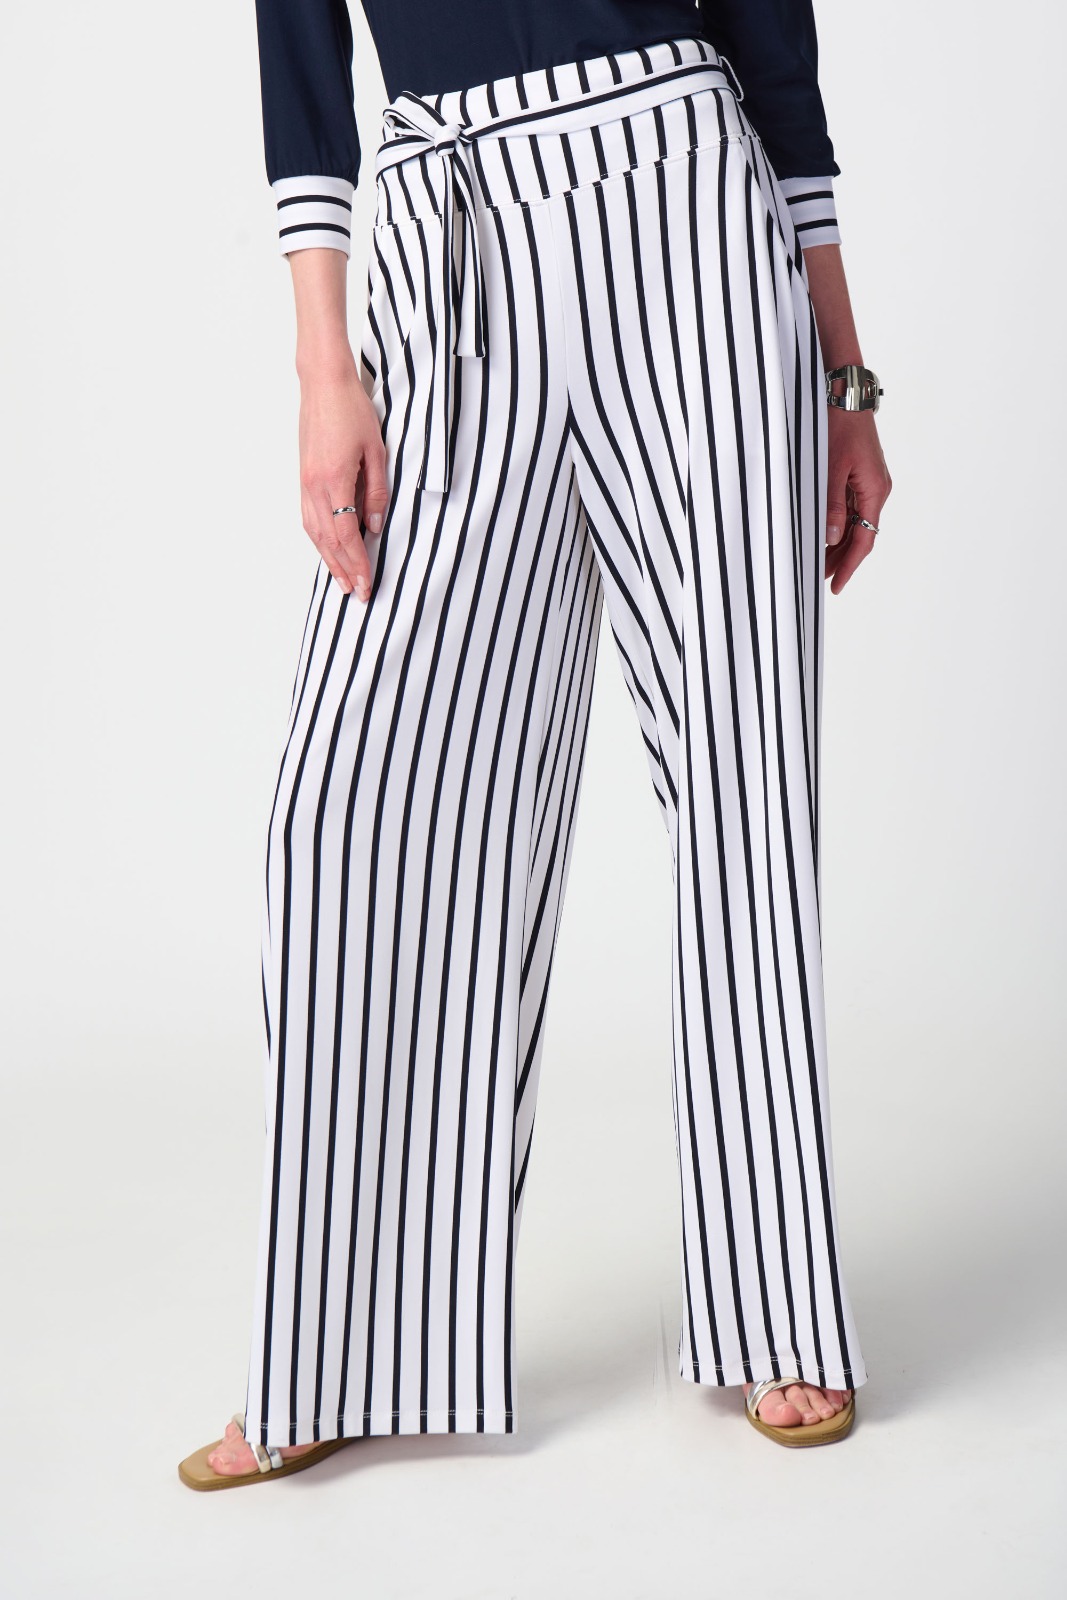 New Look satin wide leg pants in black and white stripe | ASOS